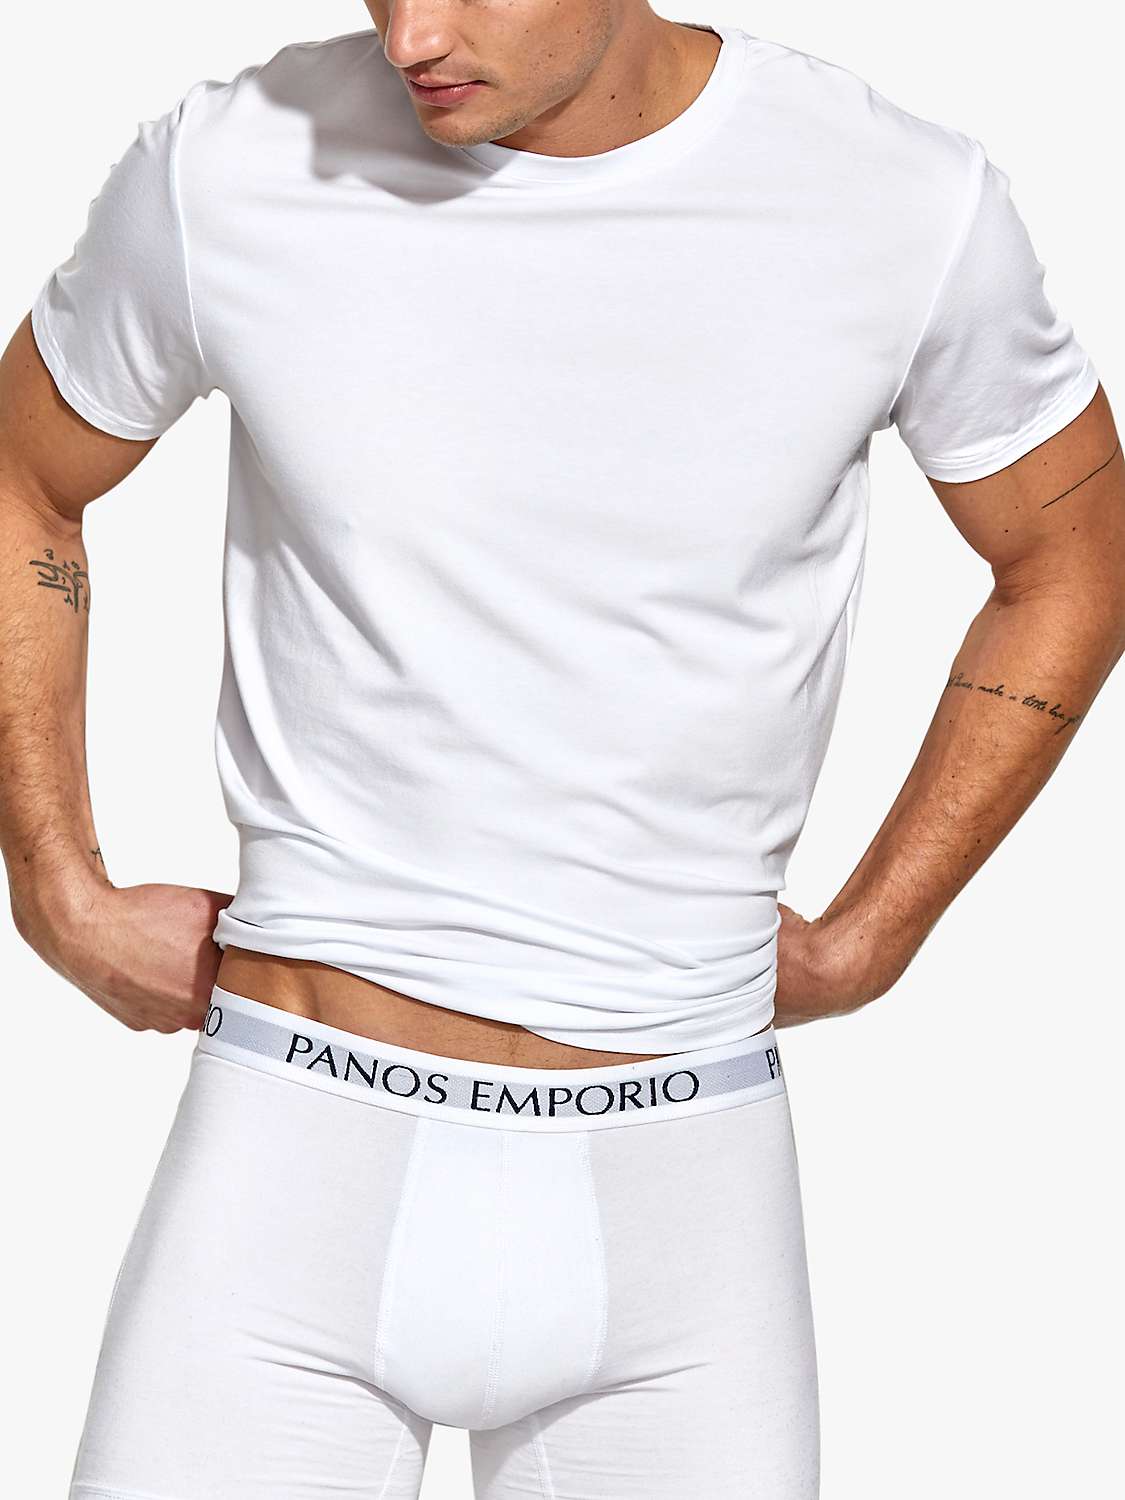 Buy Panos Emporio Eco Bamboo and Organic Cotton Blend Trunks, Pack of 3 Online at johnlewis.com